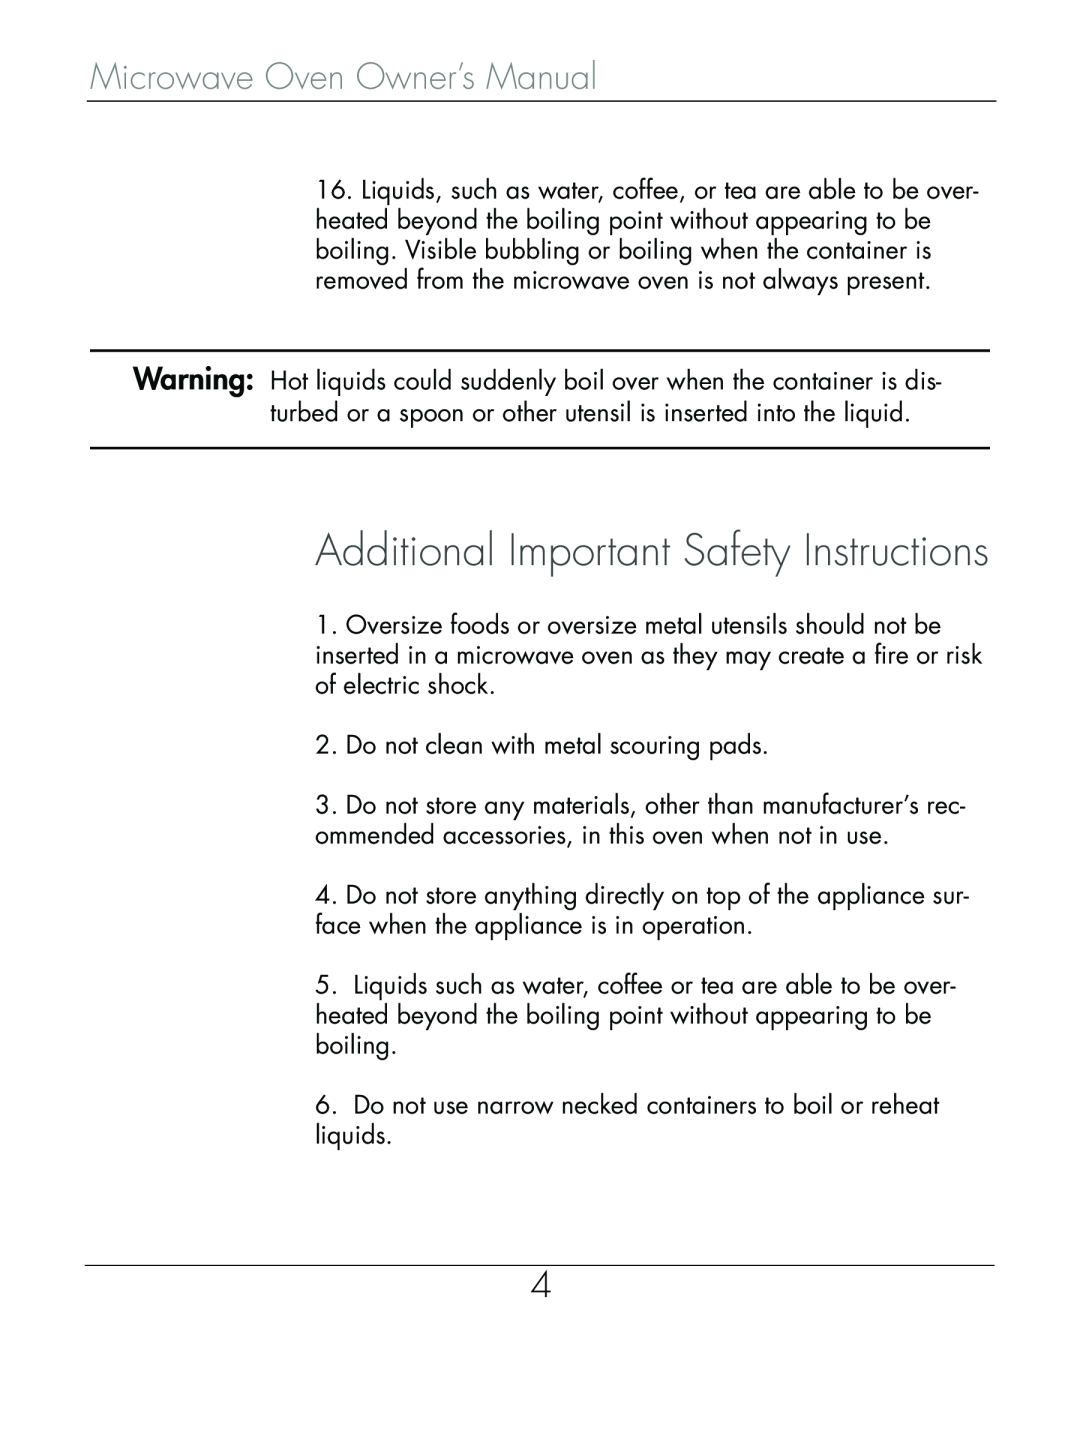 Beyond Microwace Oven manual Additional Important Safety Instructions 